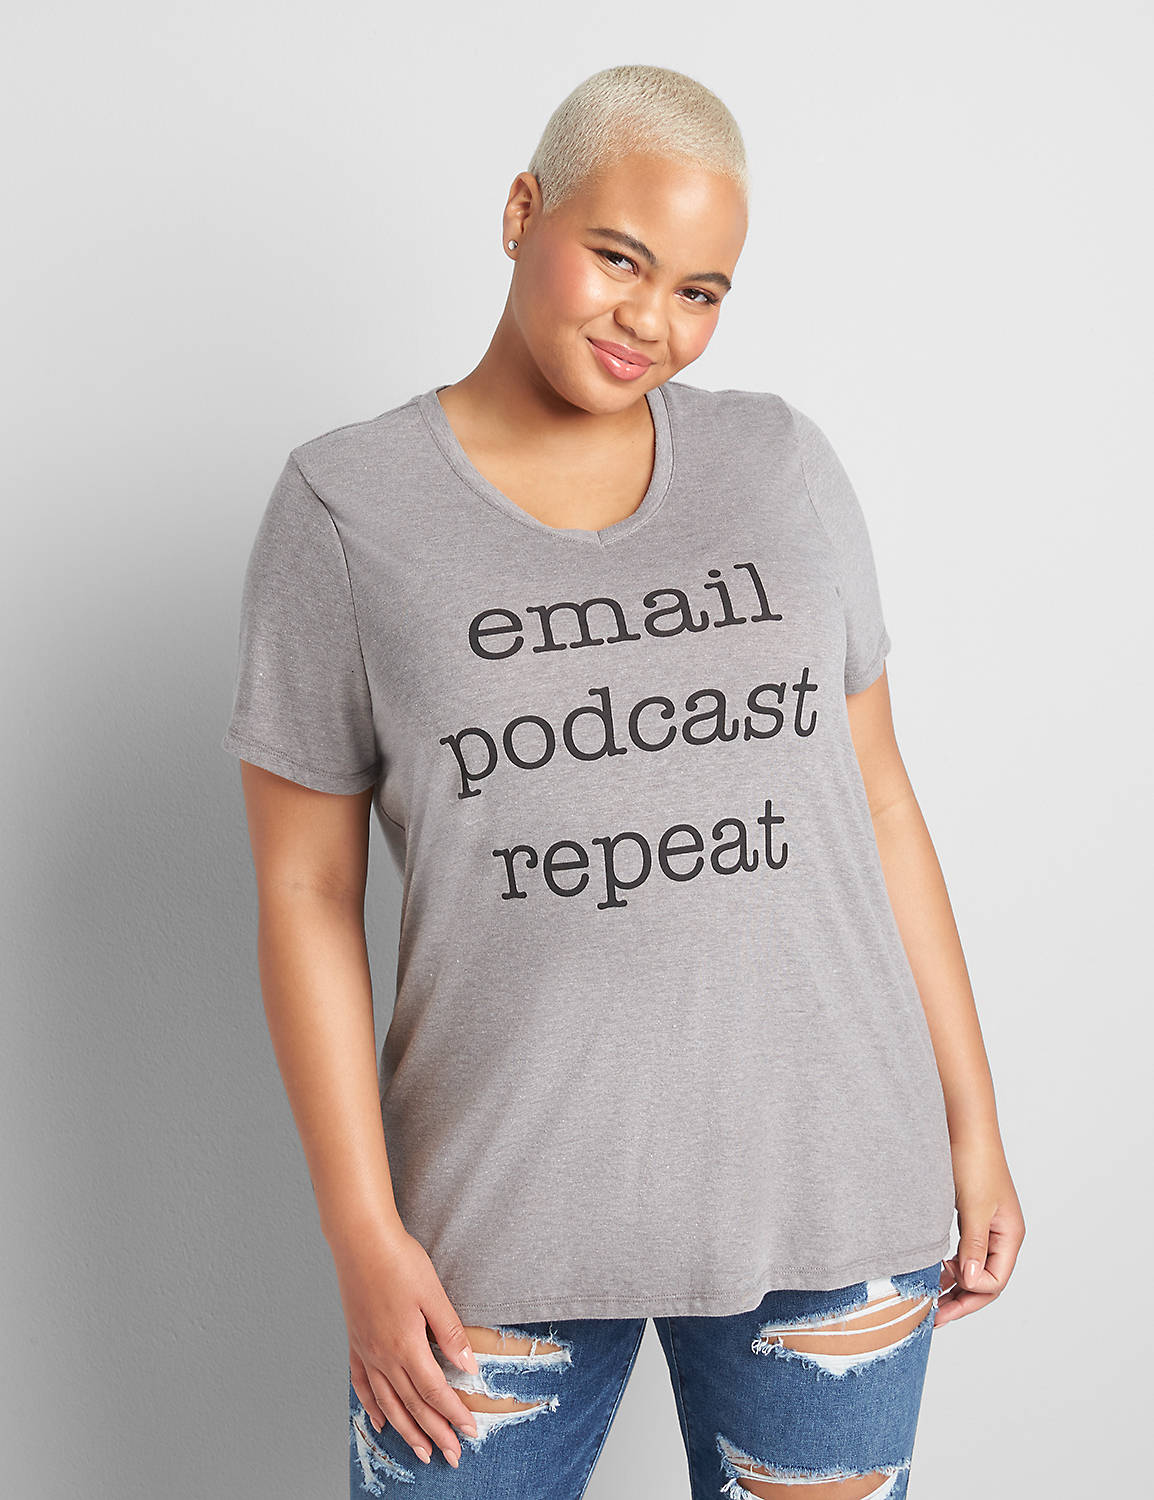 Email Podcast Repeat Graphic Tee Product Image 1